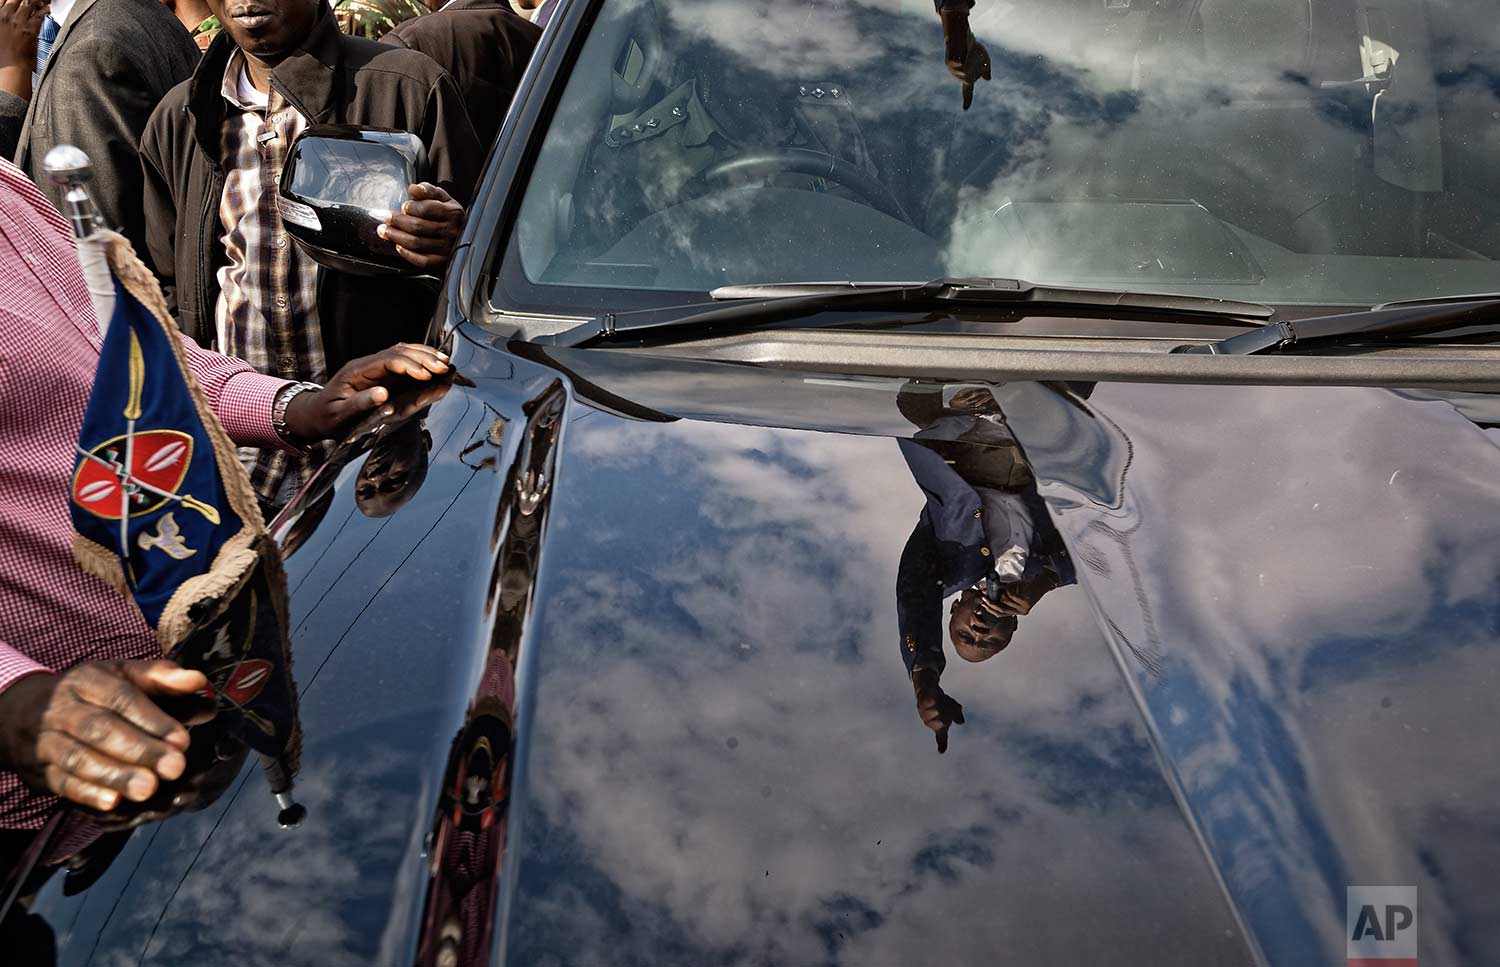  In this Tuesday, Sept. 5, 2017 photo, Kenya's President Uhuru Kenyatta is  reflected in the hood of the presidential vehicle in which he is standing, addresses his supporters on a street in Ongata Rongai, on the outskirts of Nairobi, Kenya. (AP Phot